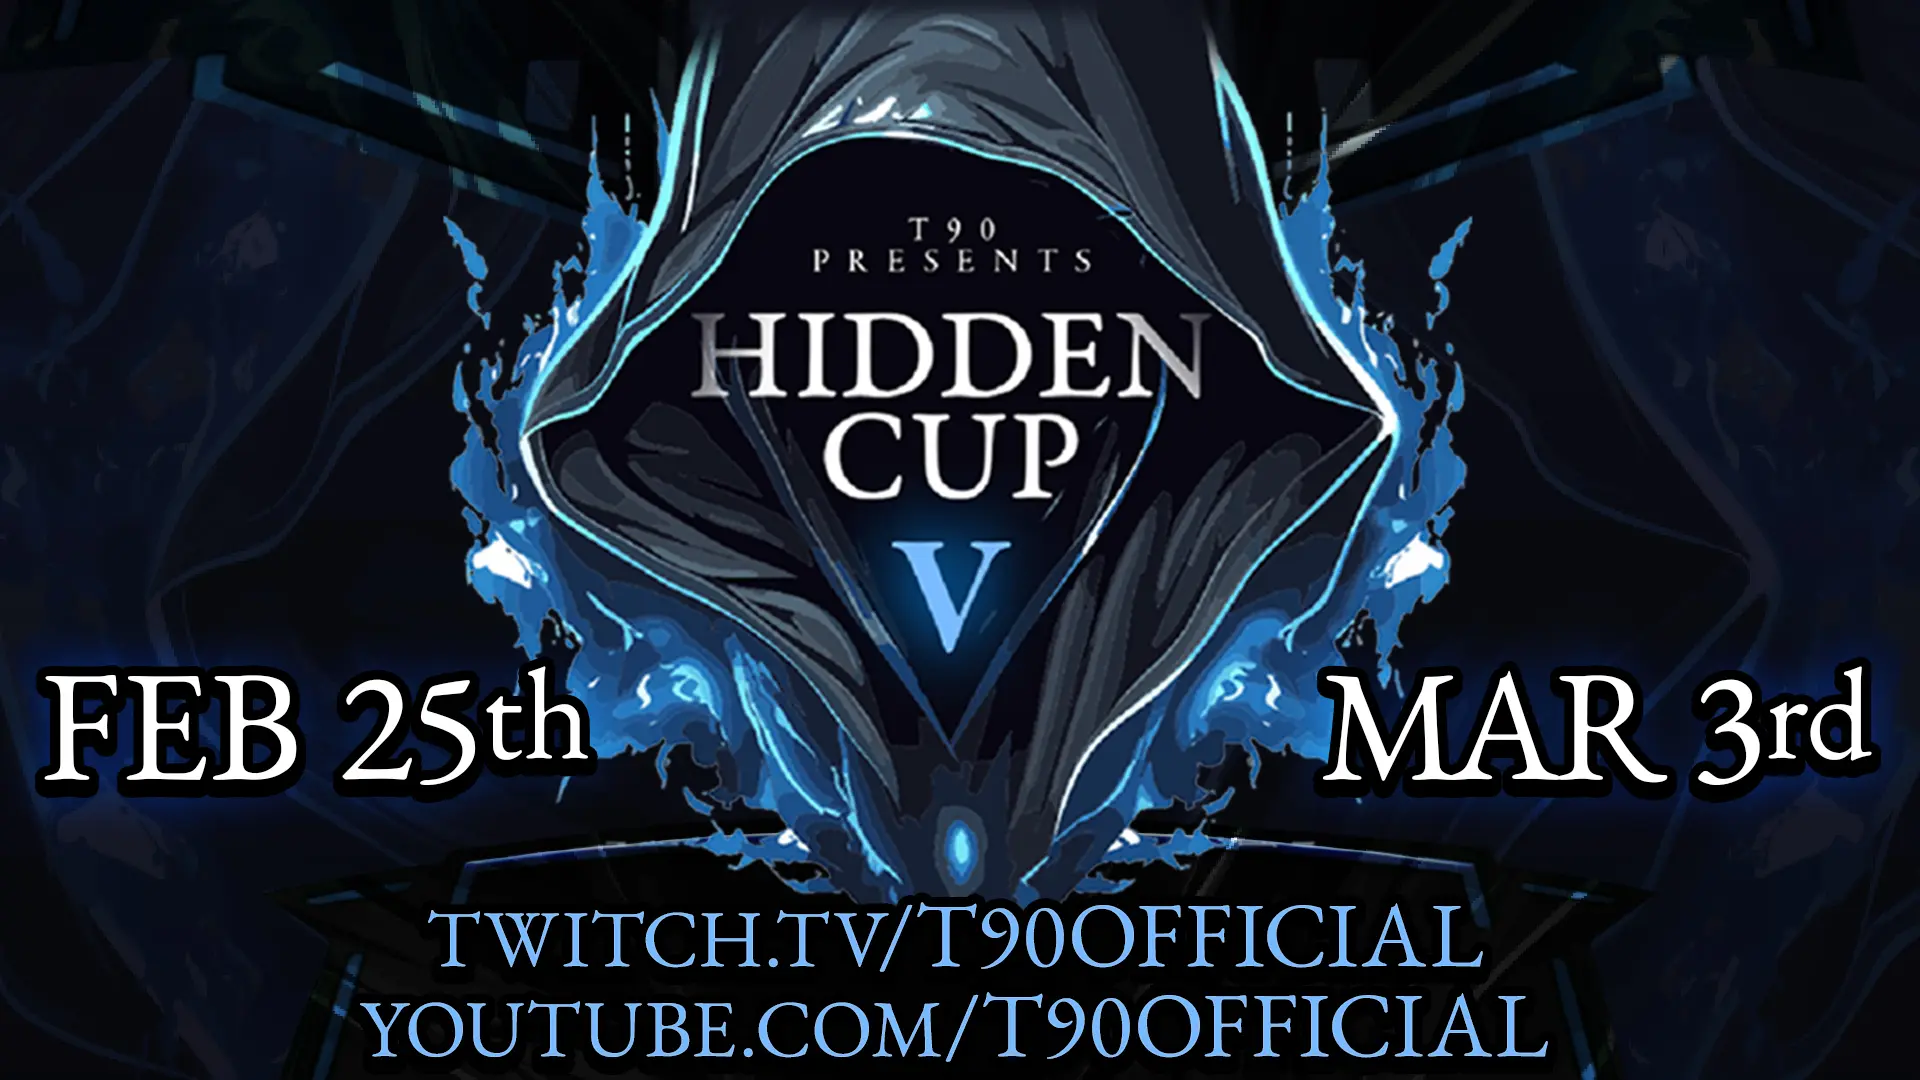 Hidden Cup V Tournament February 25th to March 3rd